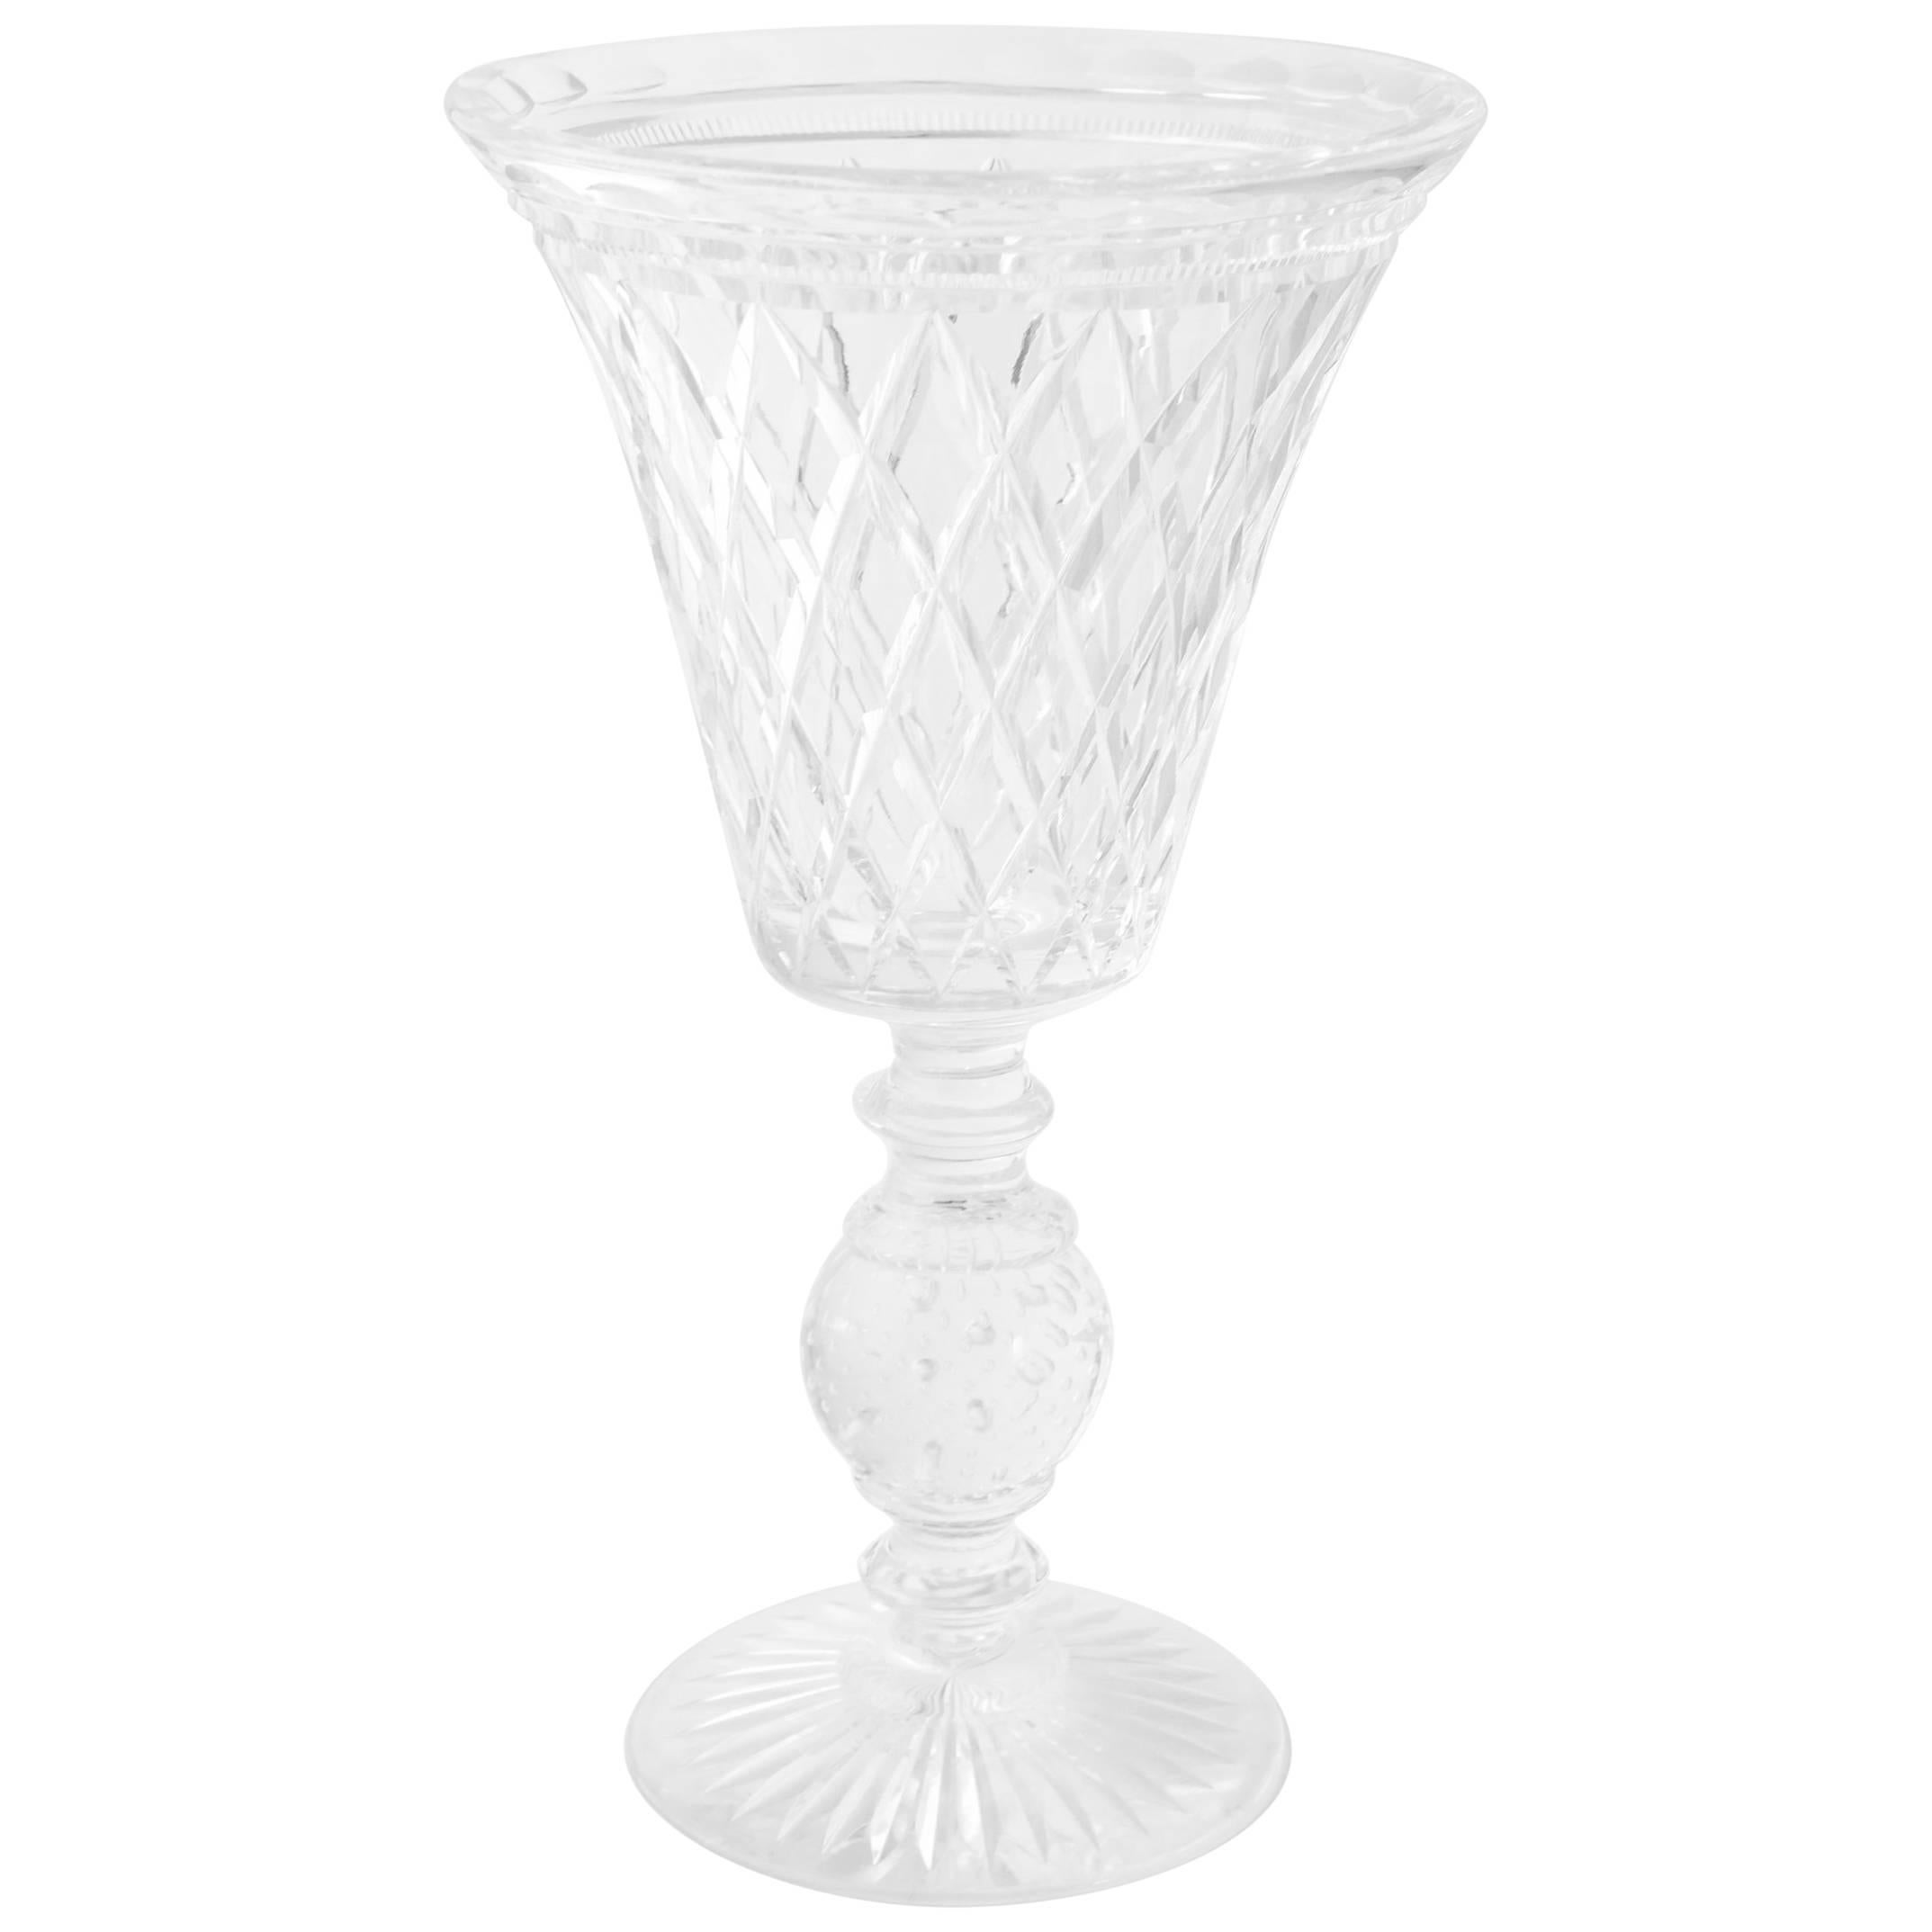 Large Mid 20th Century Chalice Shaped Cut-Glass Pairpoint Vase